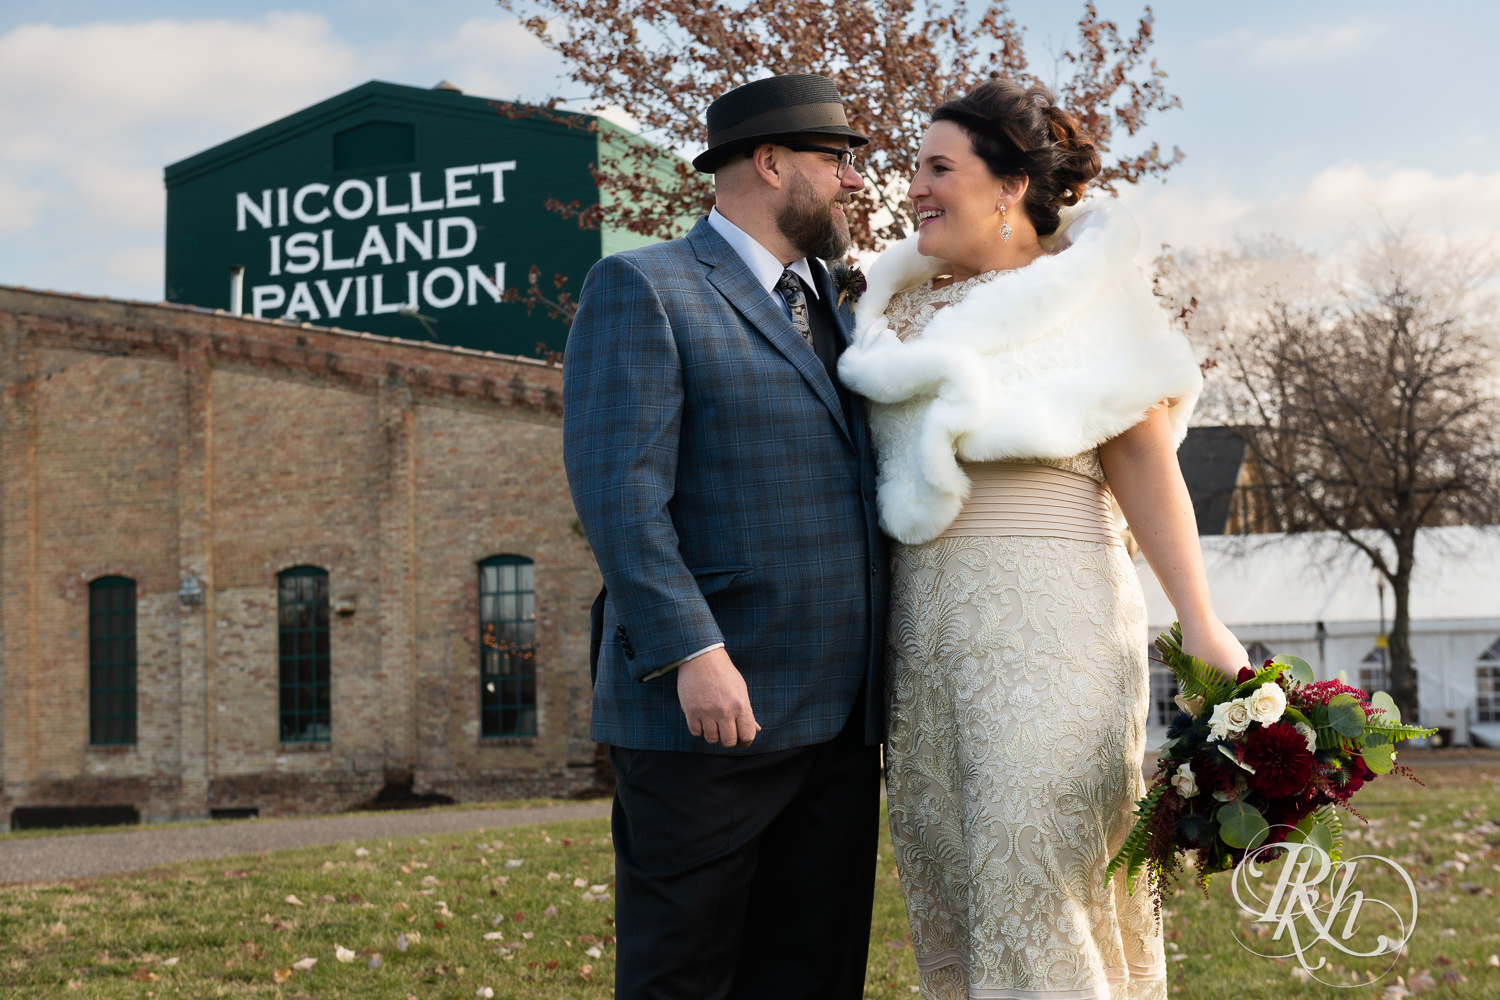 Bride and groom stand outside Nicollet Island Pavilion on their wedding day.